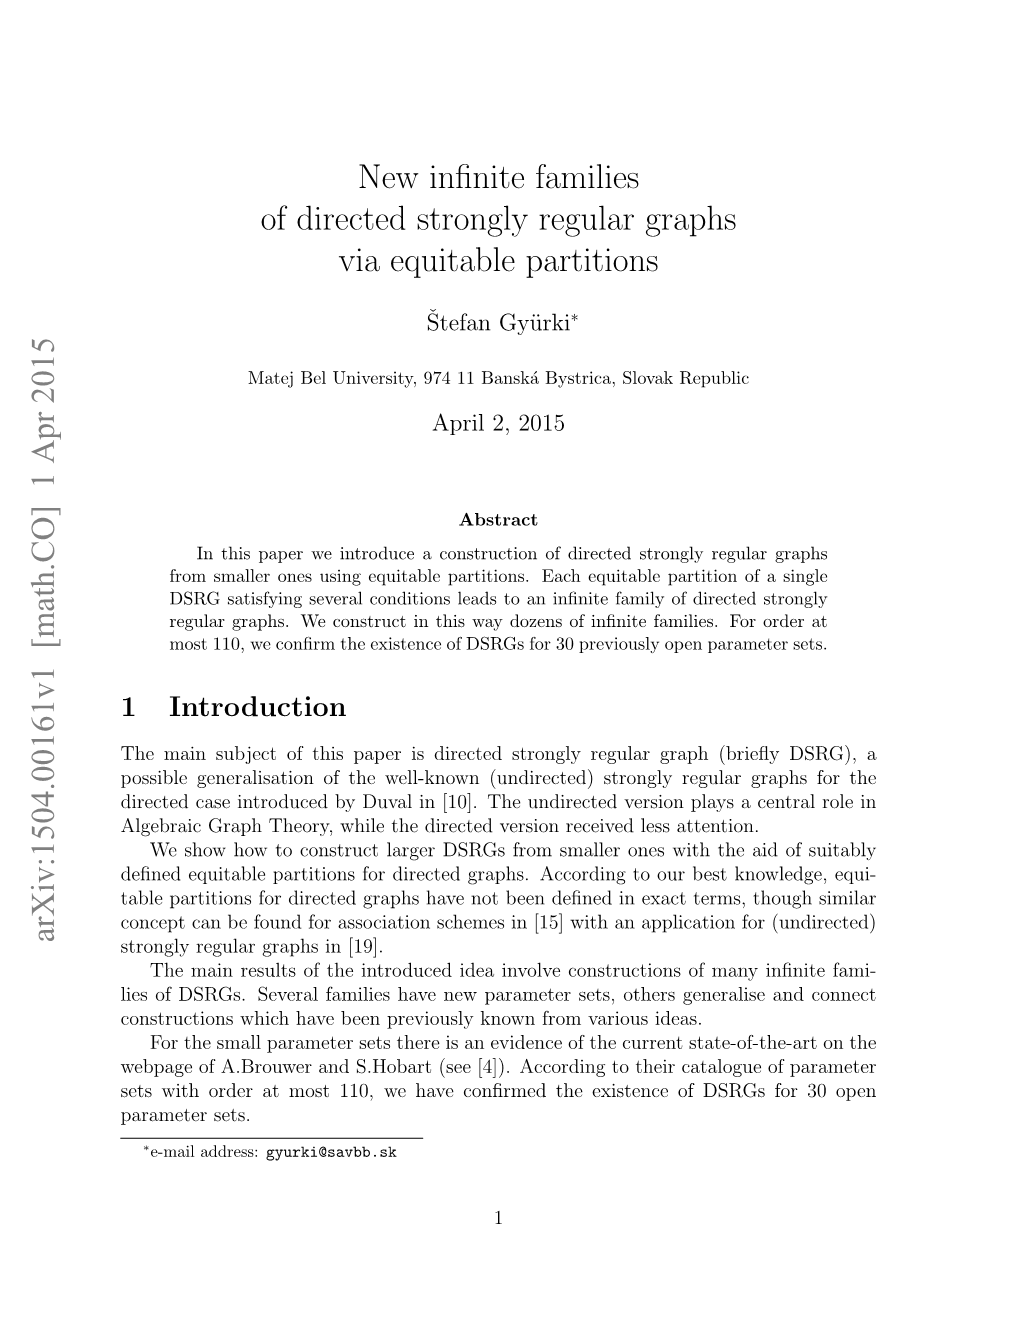 New Infinite Families of Directed Strongly Regular Graphs Via